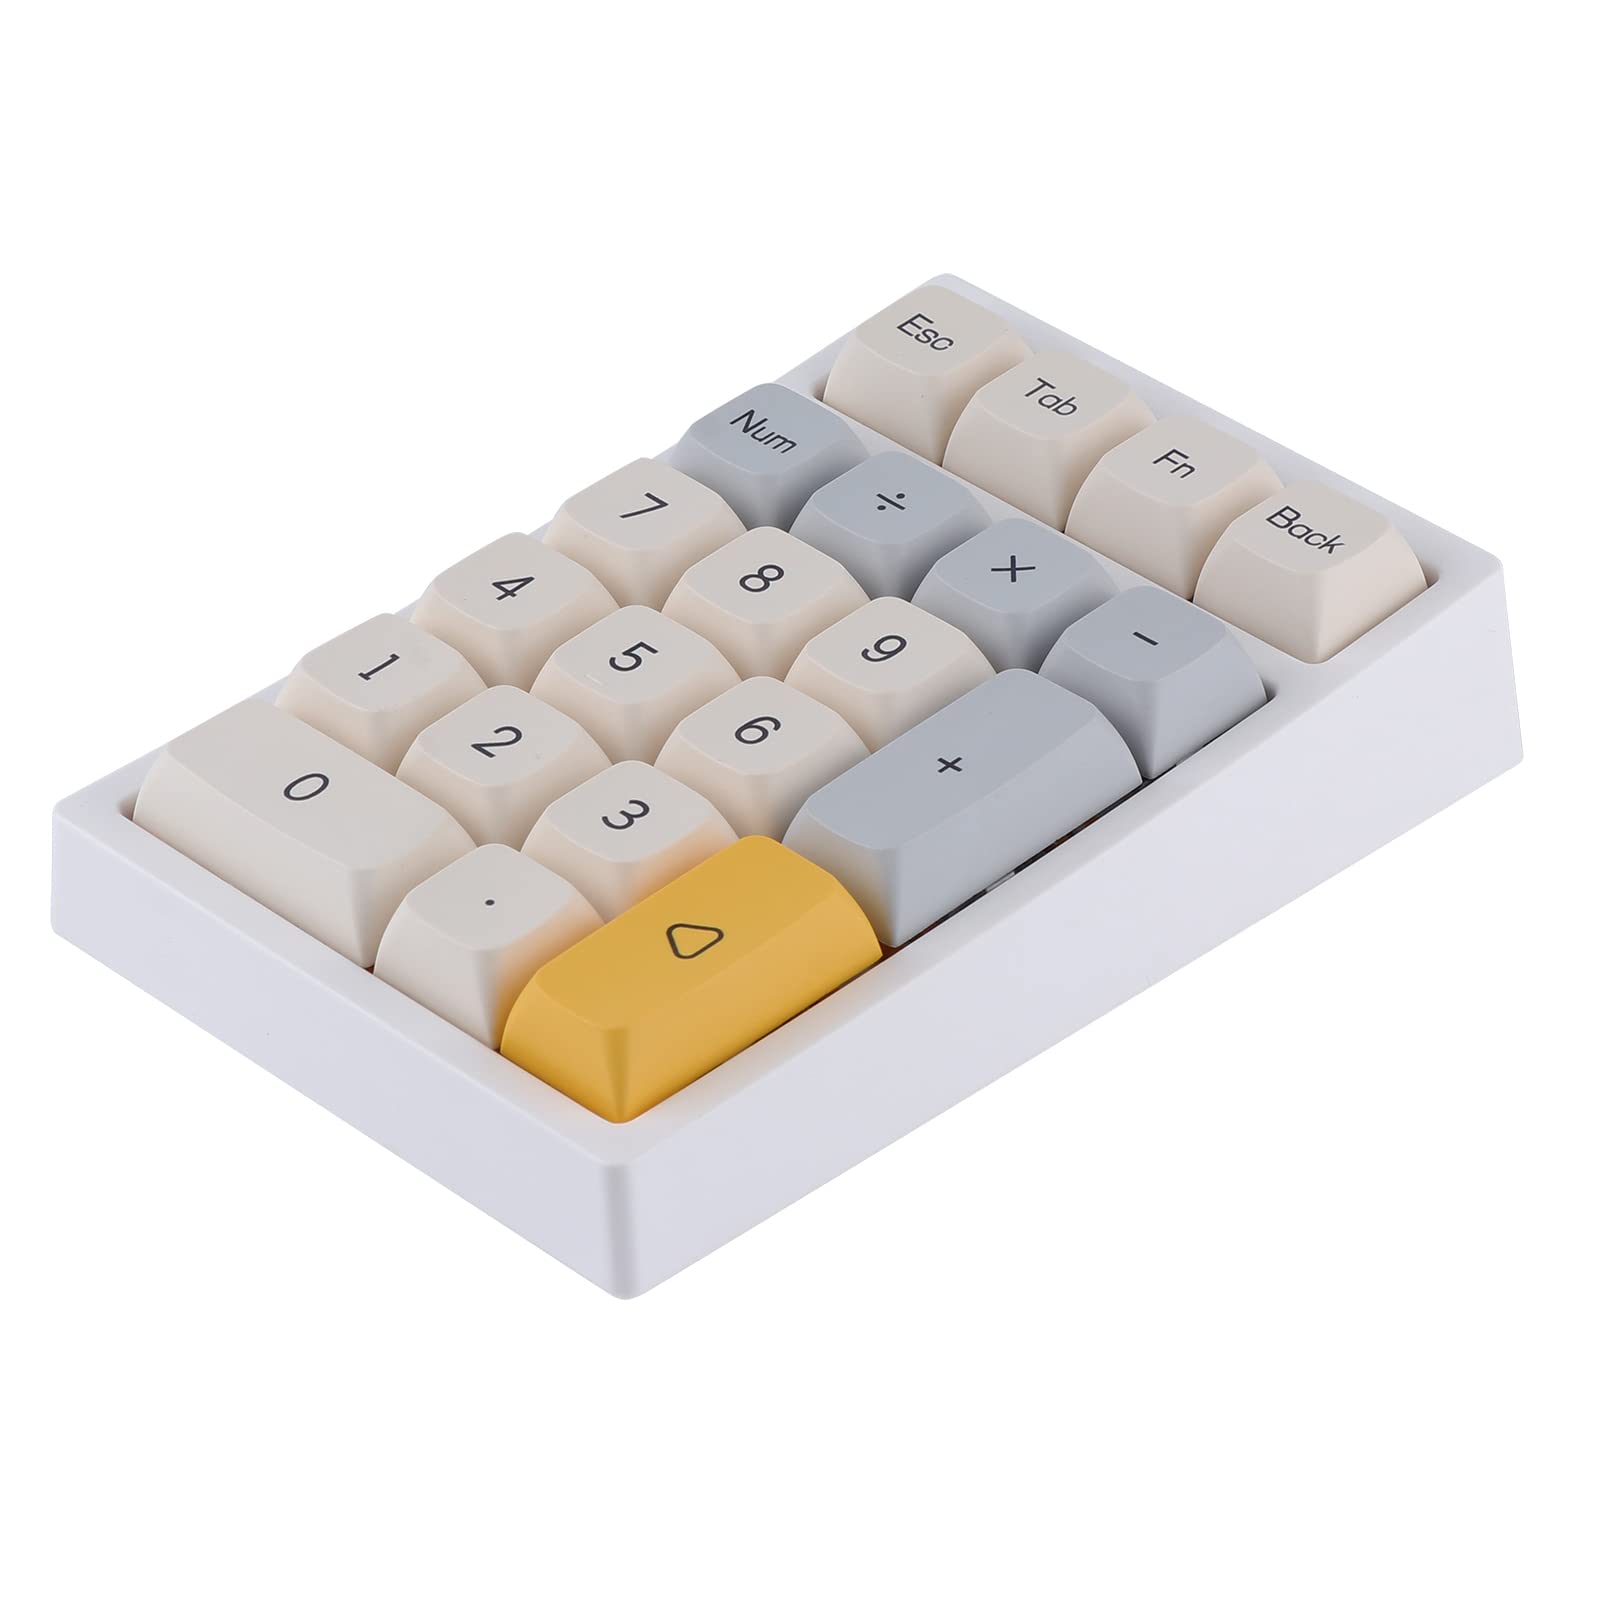 EPOMAKER TH21 21 Keys Hot Swap 2.4Ghz/Bluetooth 5.0/Wired Programmable RGB Mechanical Gaming Numpad with XDA Profile PBT Keycaps for Win/Mac(TH21 Geometry Grey Tri-Mode, Gateron Pro Yellow)